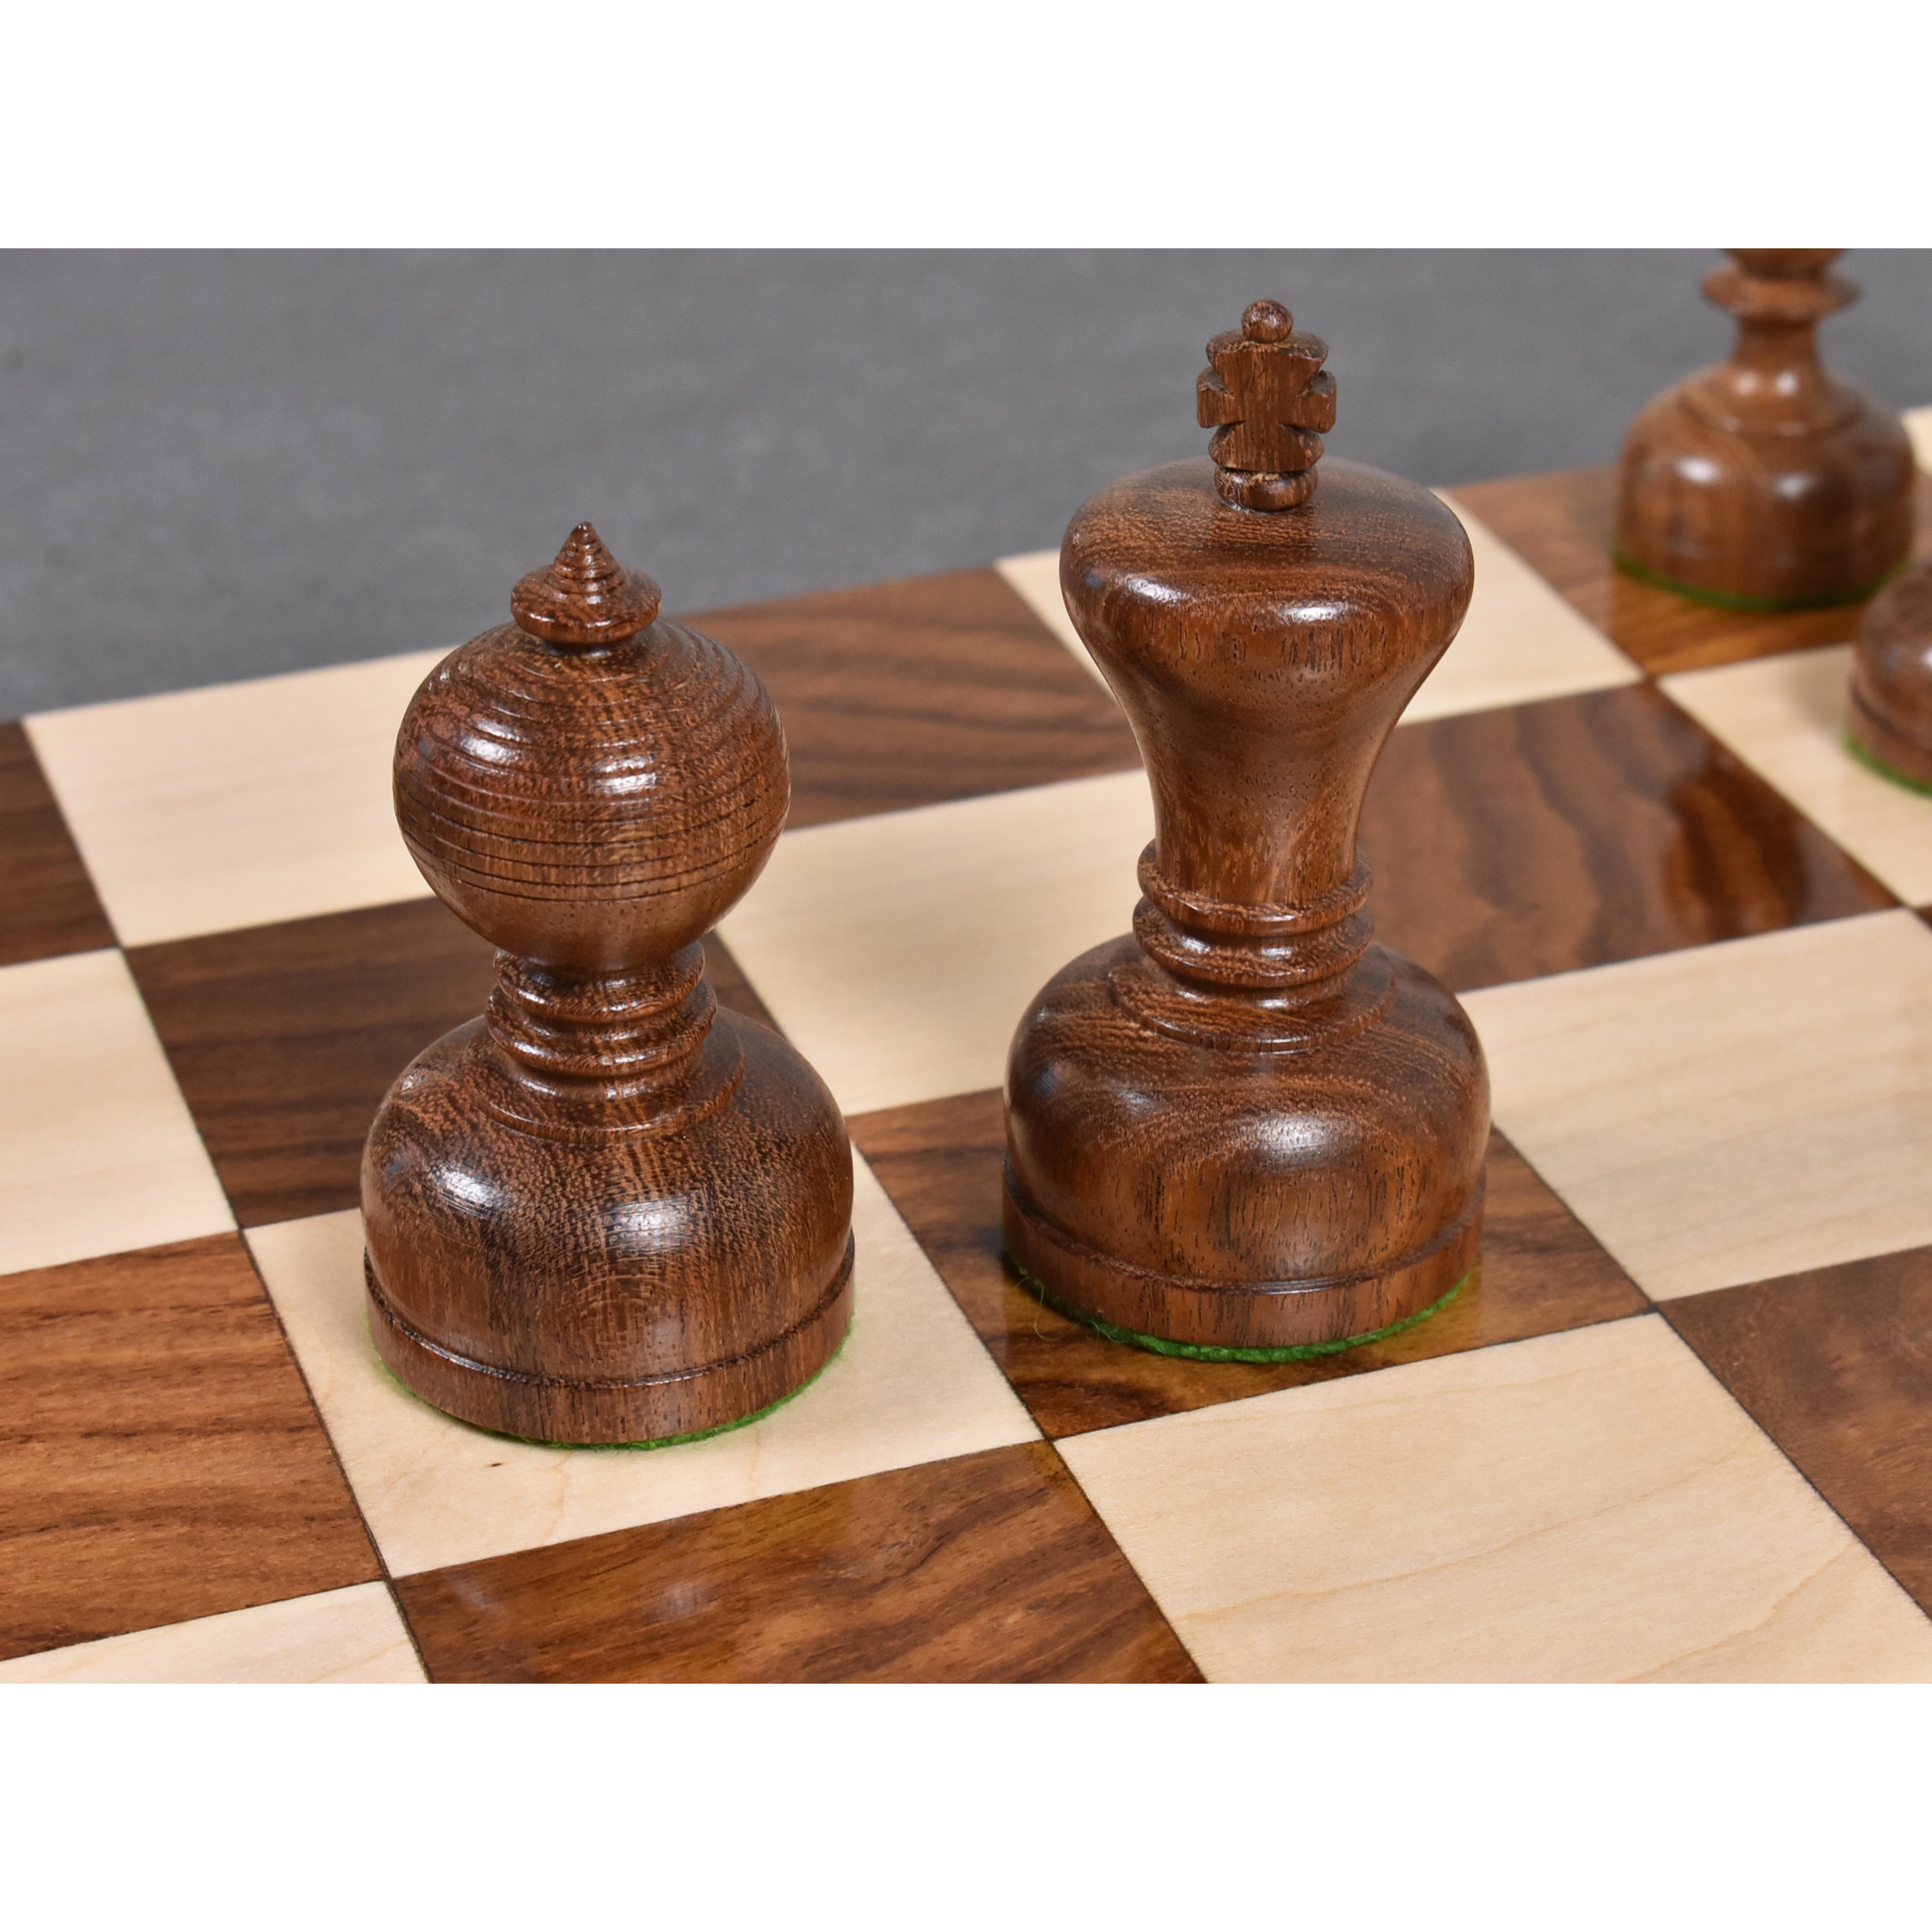 3.1" Library Combo Chess Set - Staunton Chess Pieces + Board- Golden Rosewood